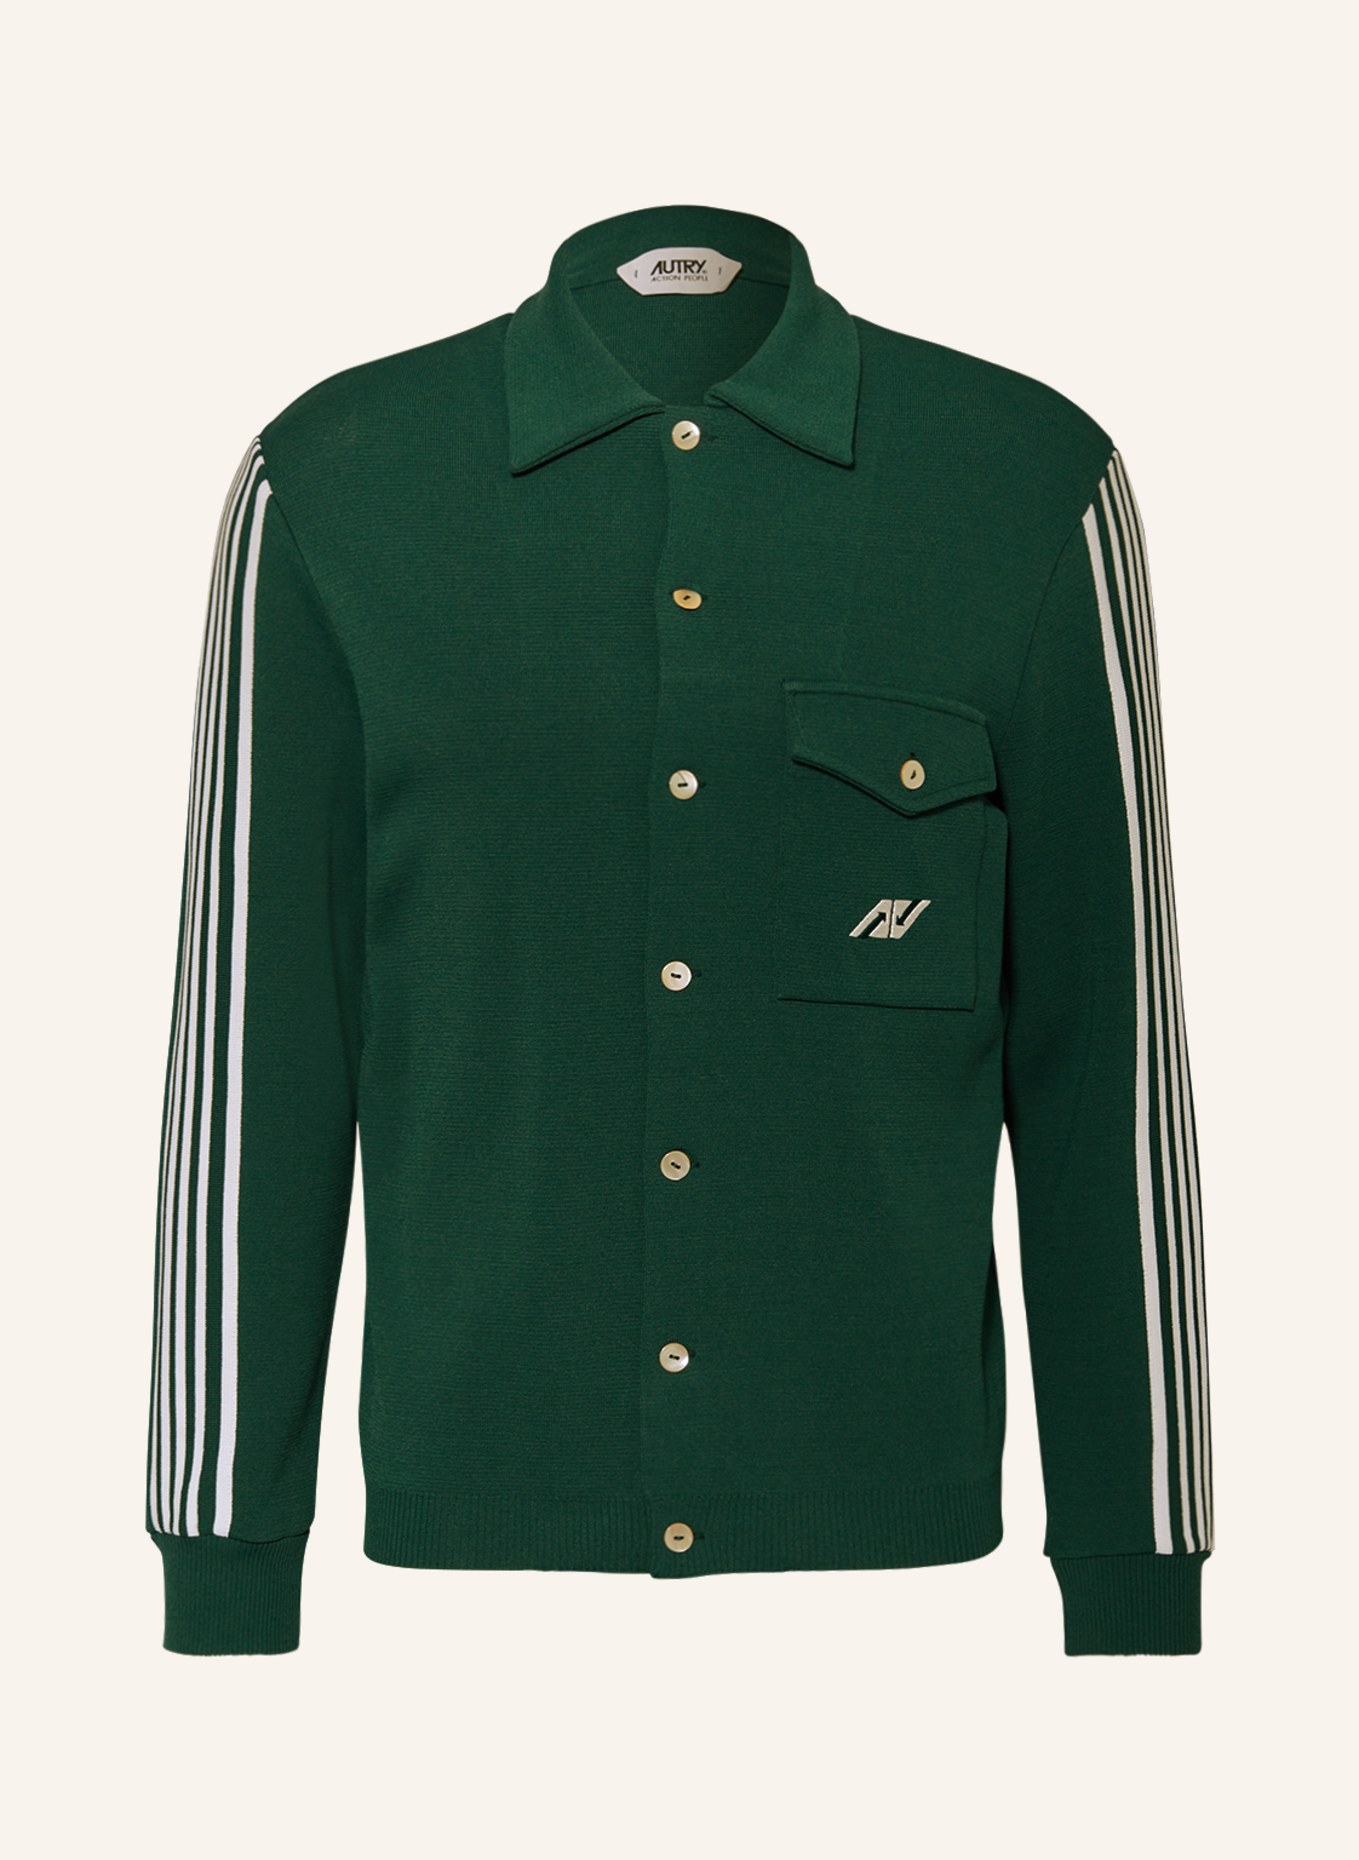 AUTRY Overshirt with tuxedo stripes, Color: DARK GREEN (Image 1)